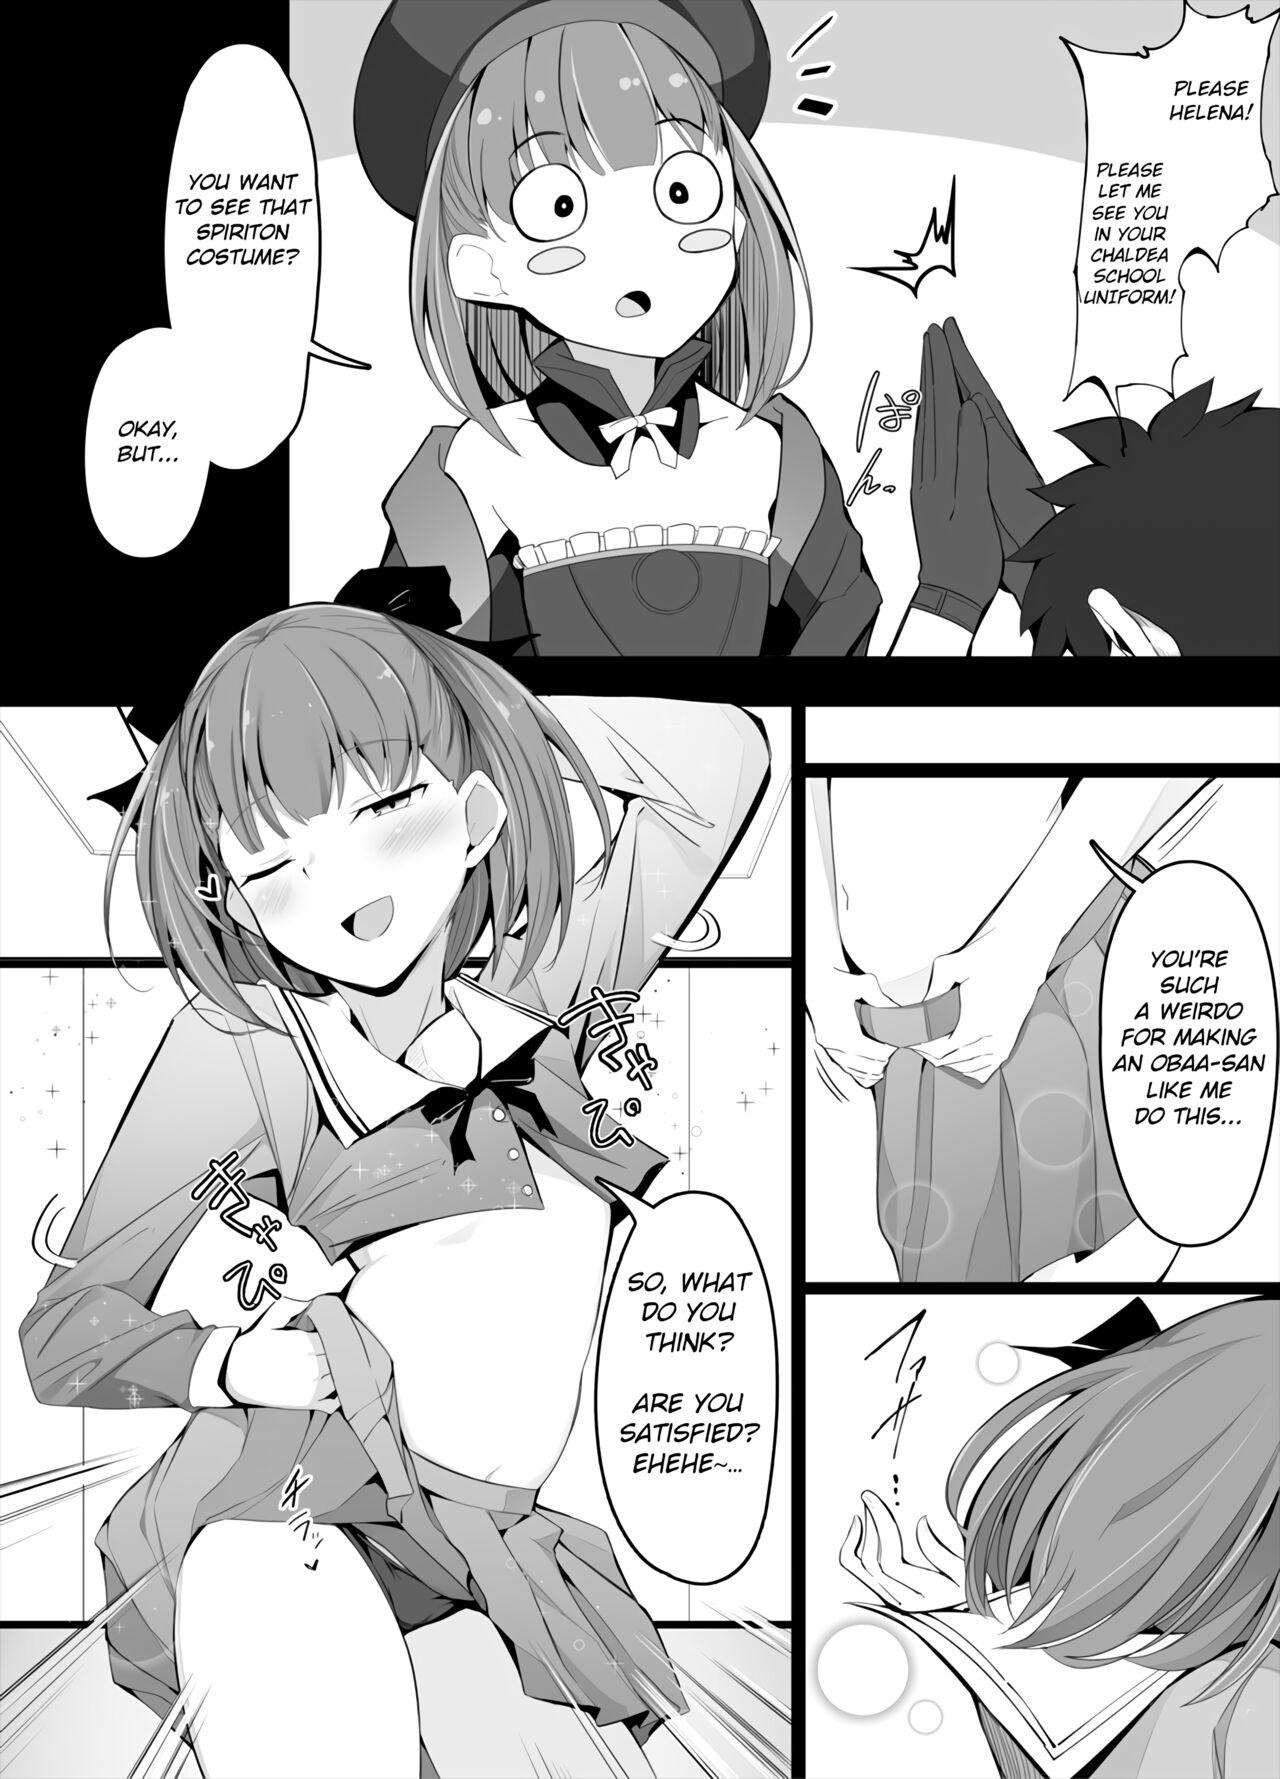 Masturbando I Teased Helena Obaa-san and It Was Scarier Than I Thought! - Fate grand order Curious - Page 4